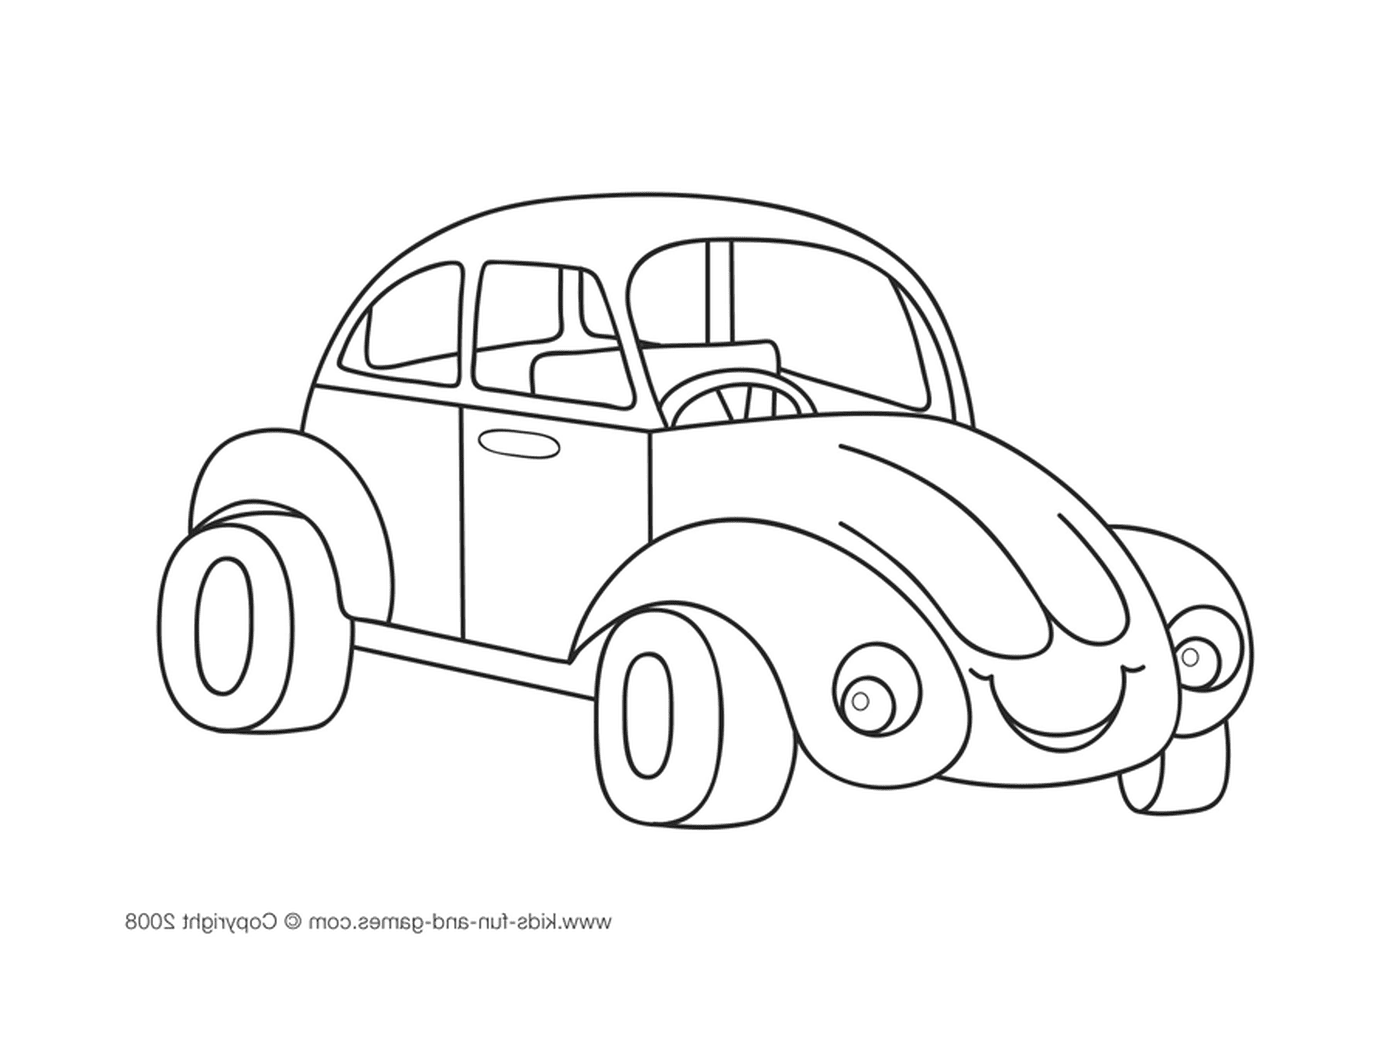  An old coccinelle car for children 